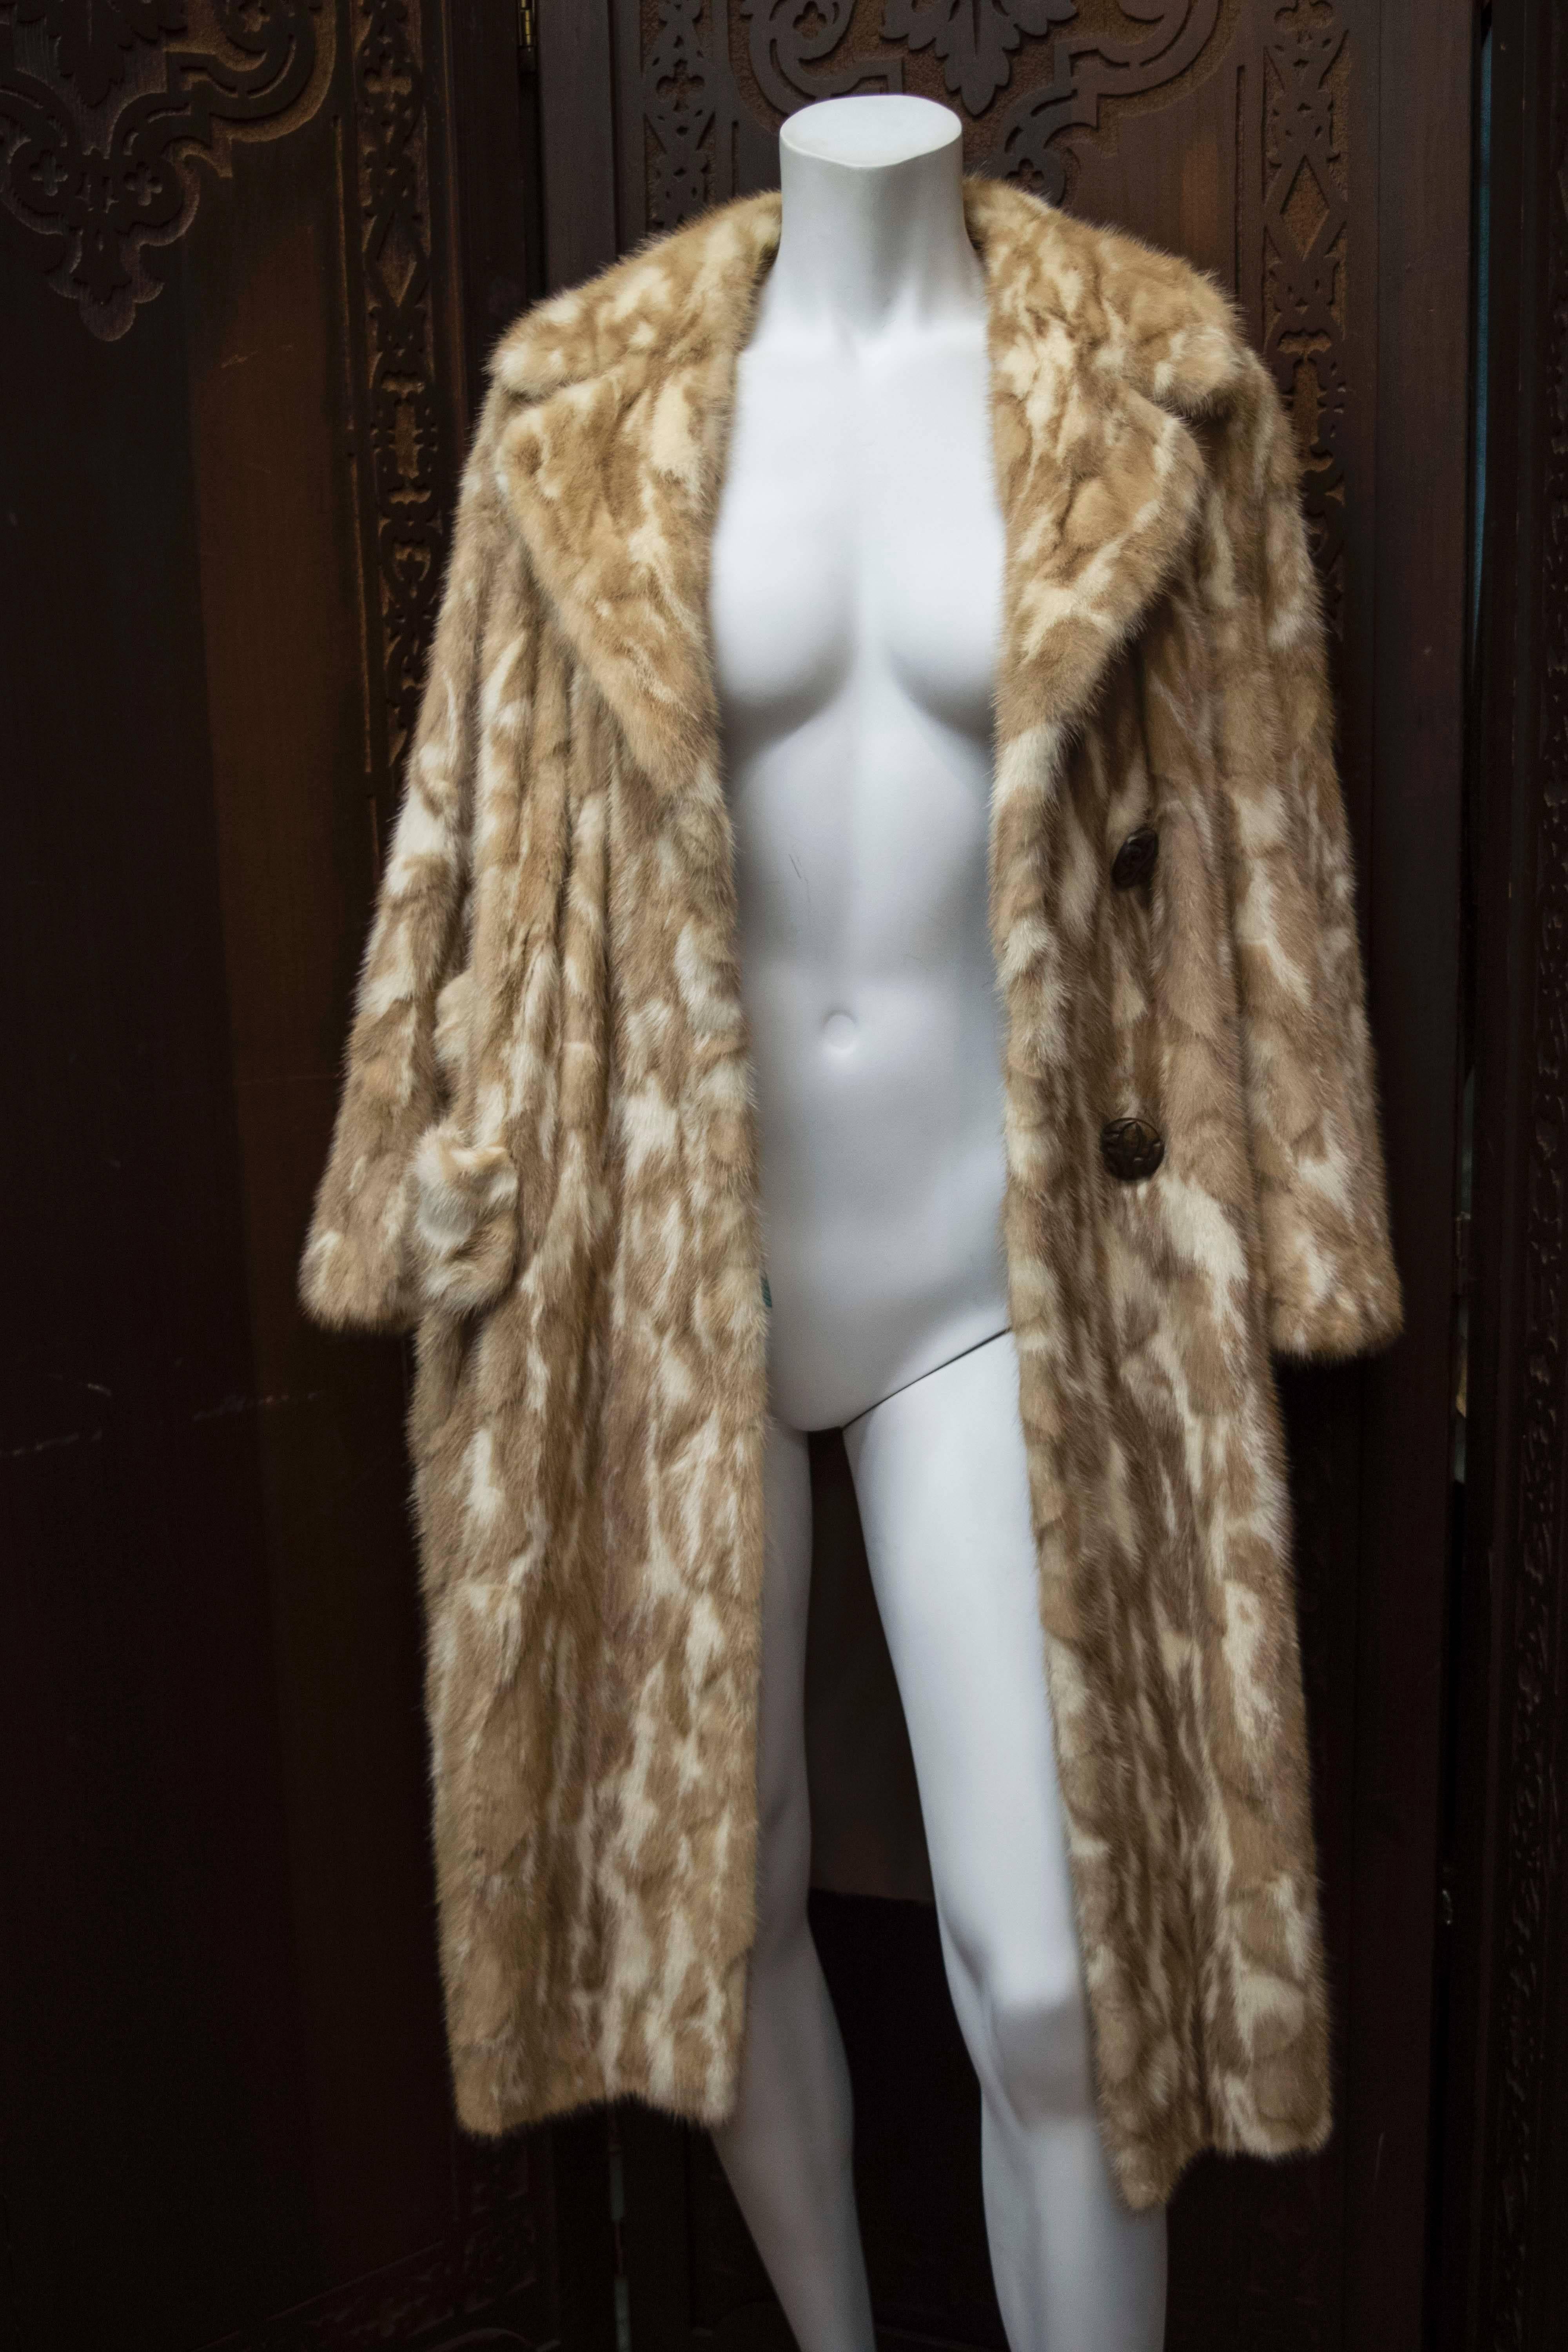 Two Tone Mink Fur Coat

Stunning Mink fur coat with belt back, made from cream and sable Mink pelts. 

B 42
W 40
H 44
L 48